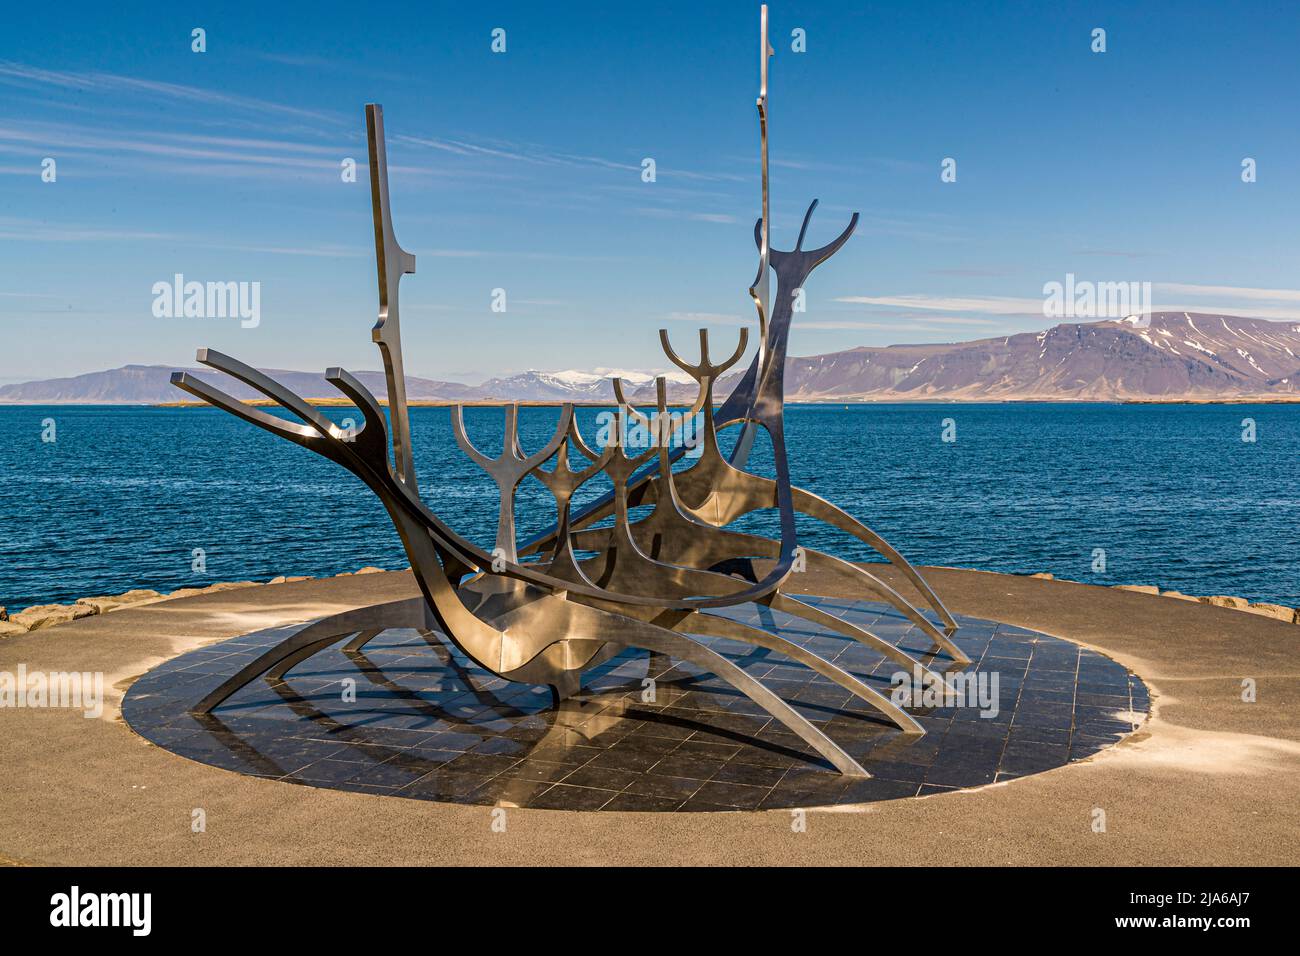 Sun Voyager. Huge 1990 stainless-steel sculpture of a boat by Jón Gunnar Árnason, set on granite beside the sea. Reykjavik, Iceland Stock Photo